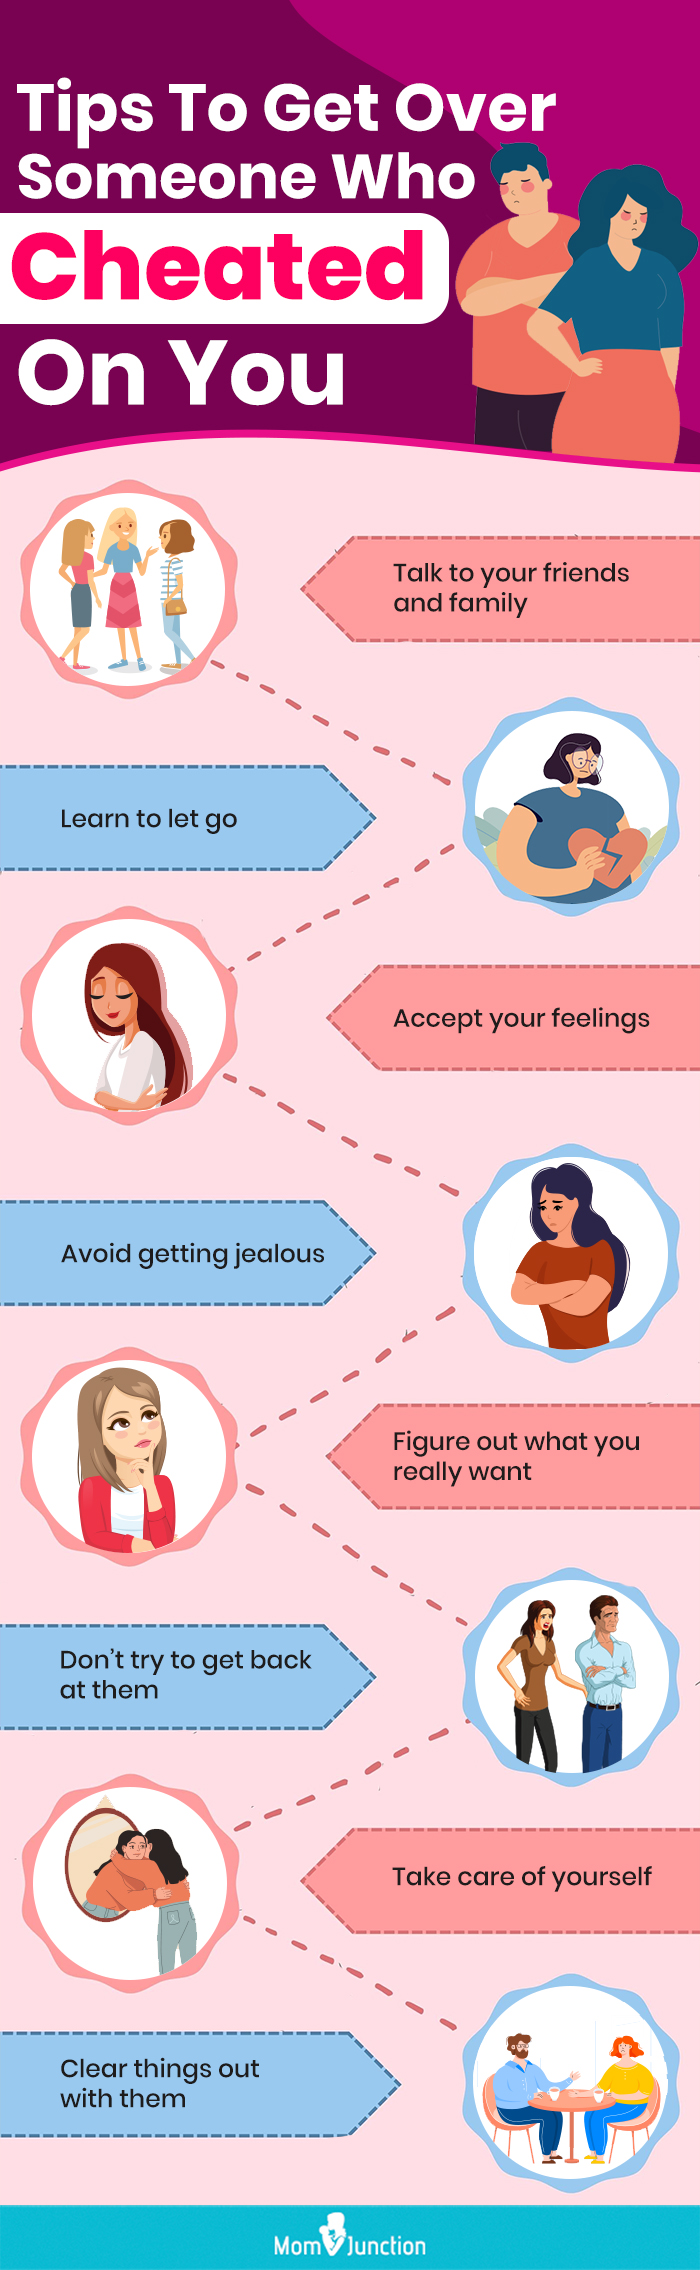 tips to get over someone cheated on you (infographic)